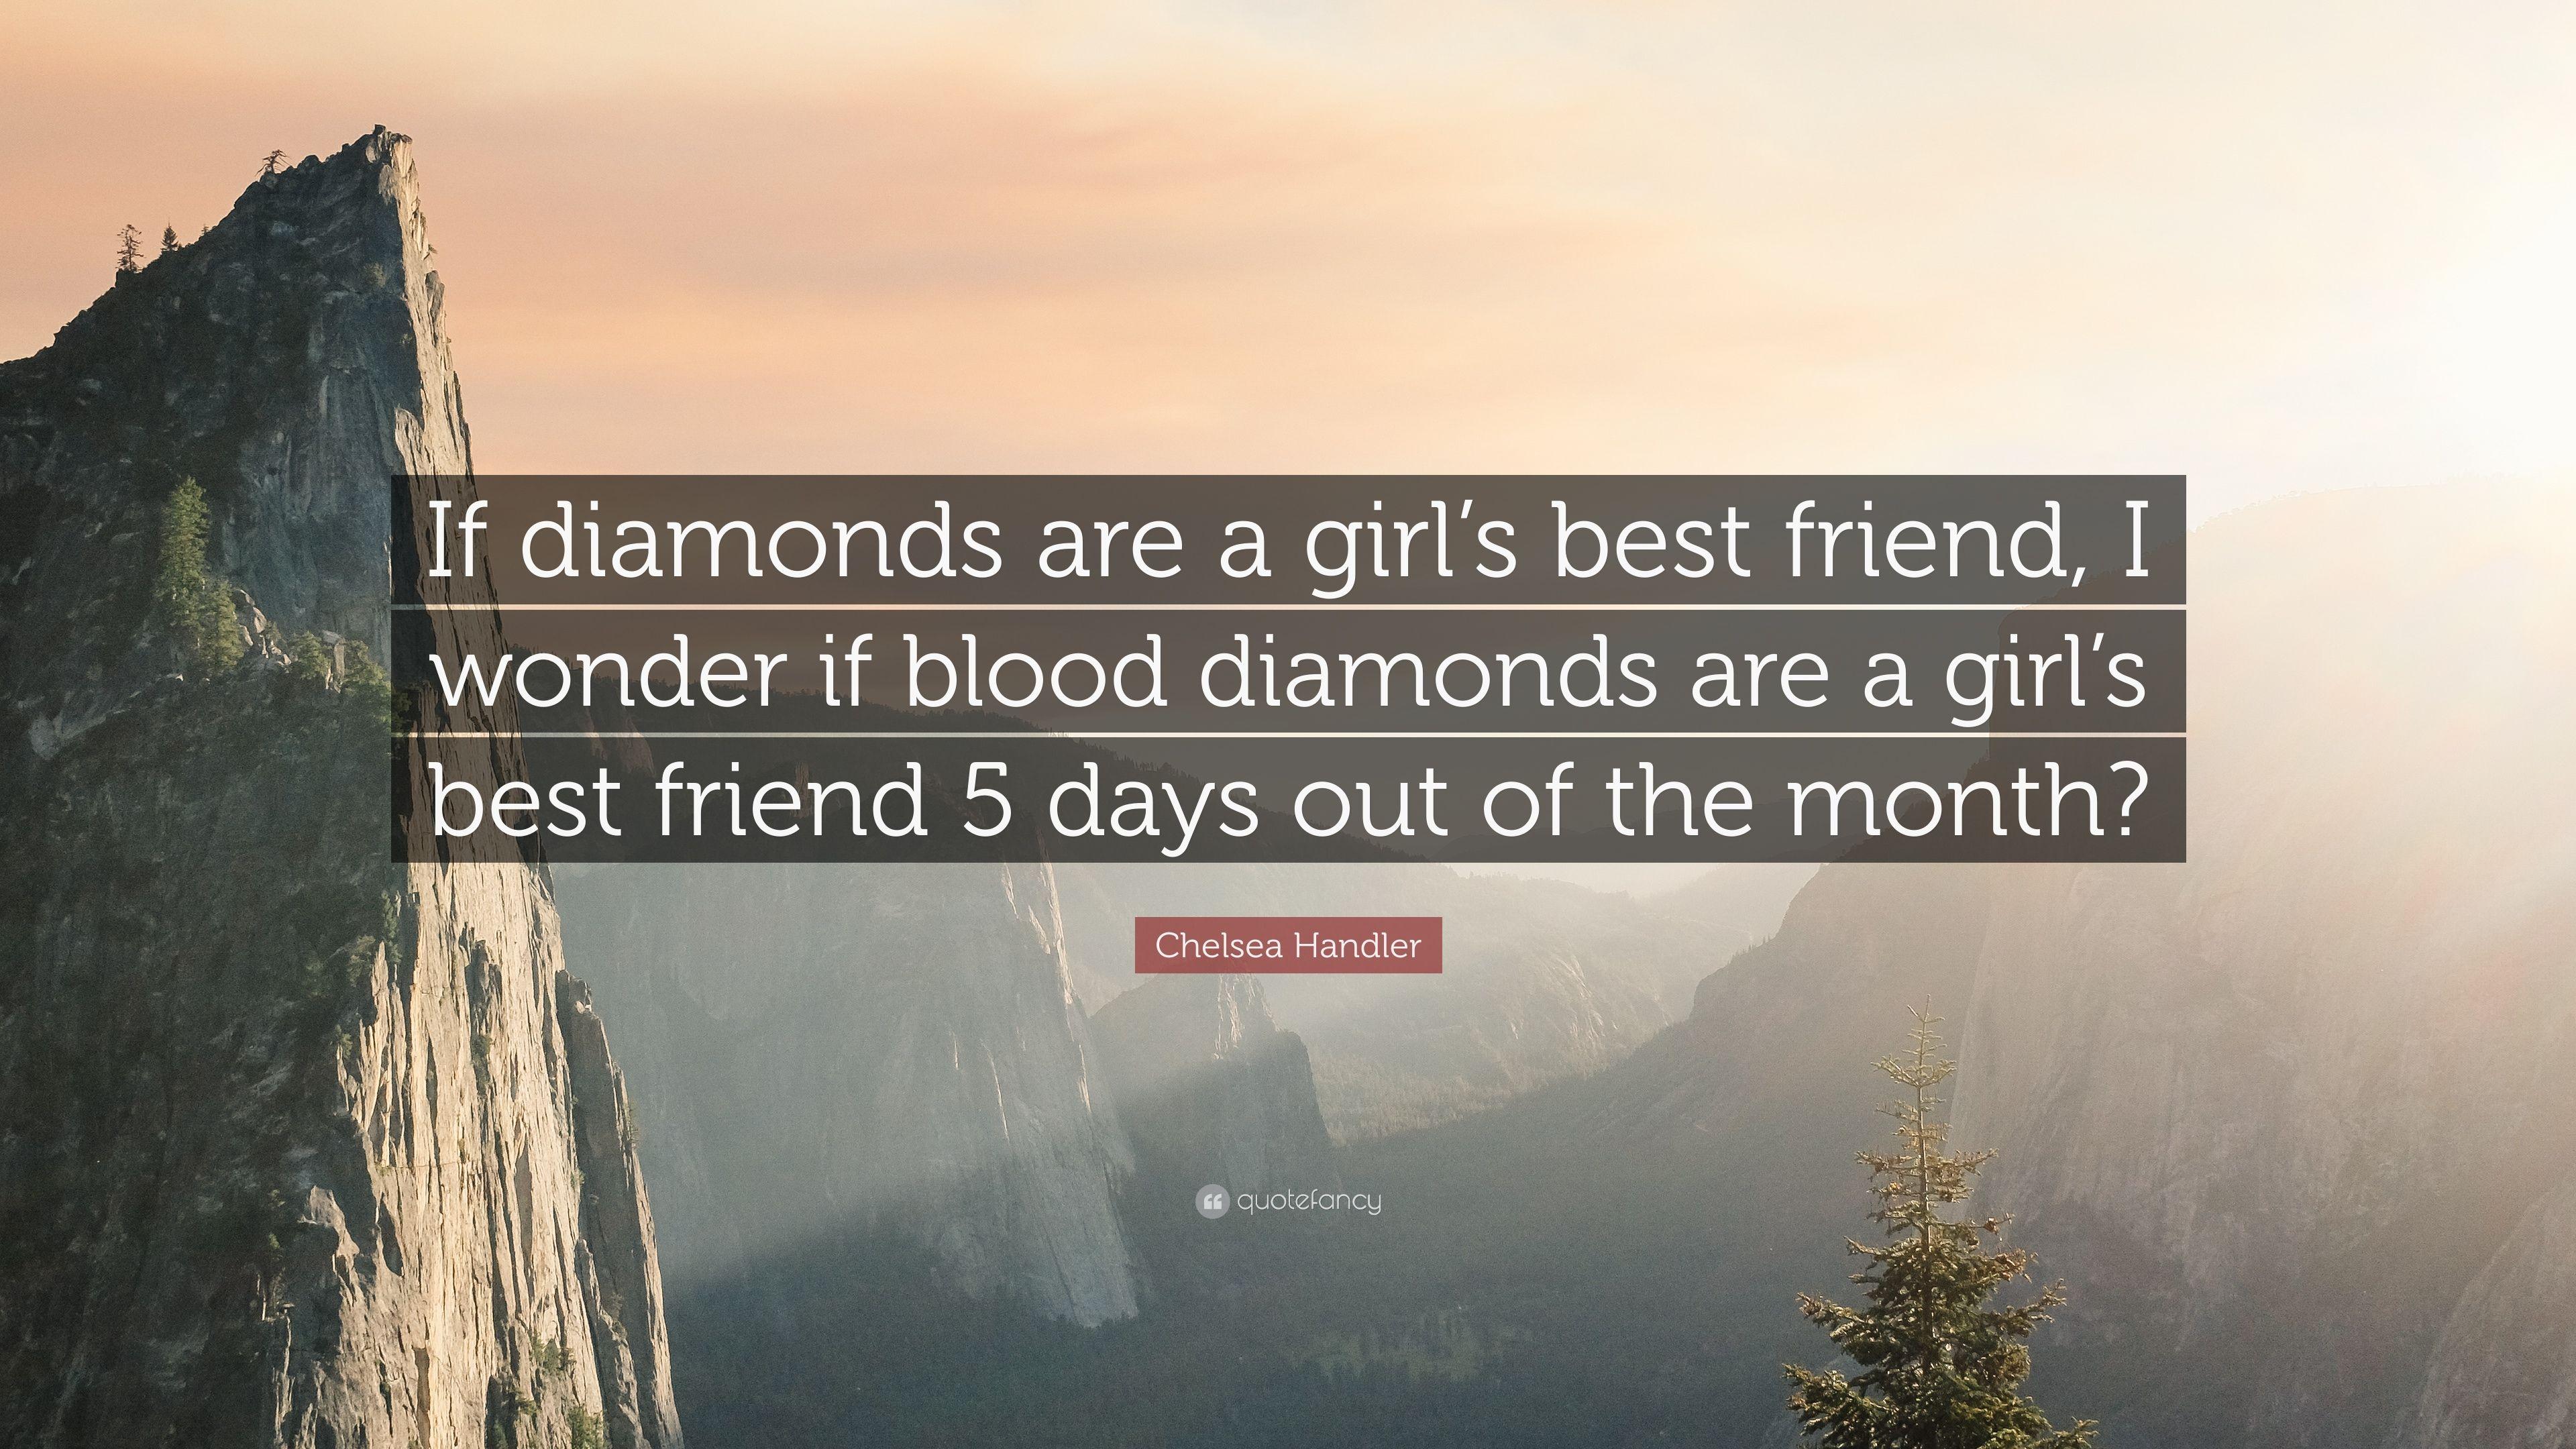 Chelsea Handler Quote: “If diamonds are a girl's best friend, I